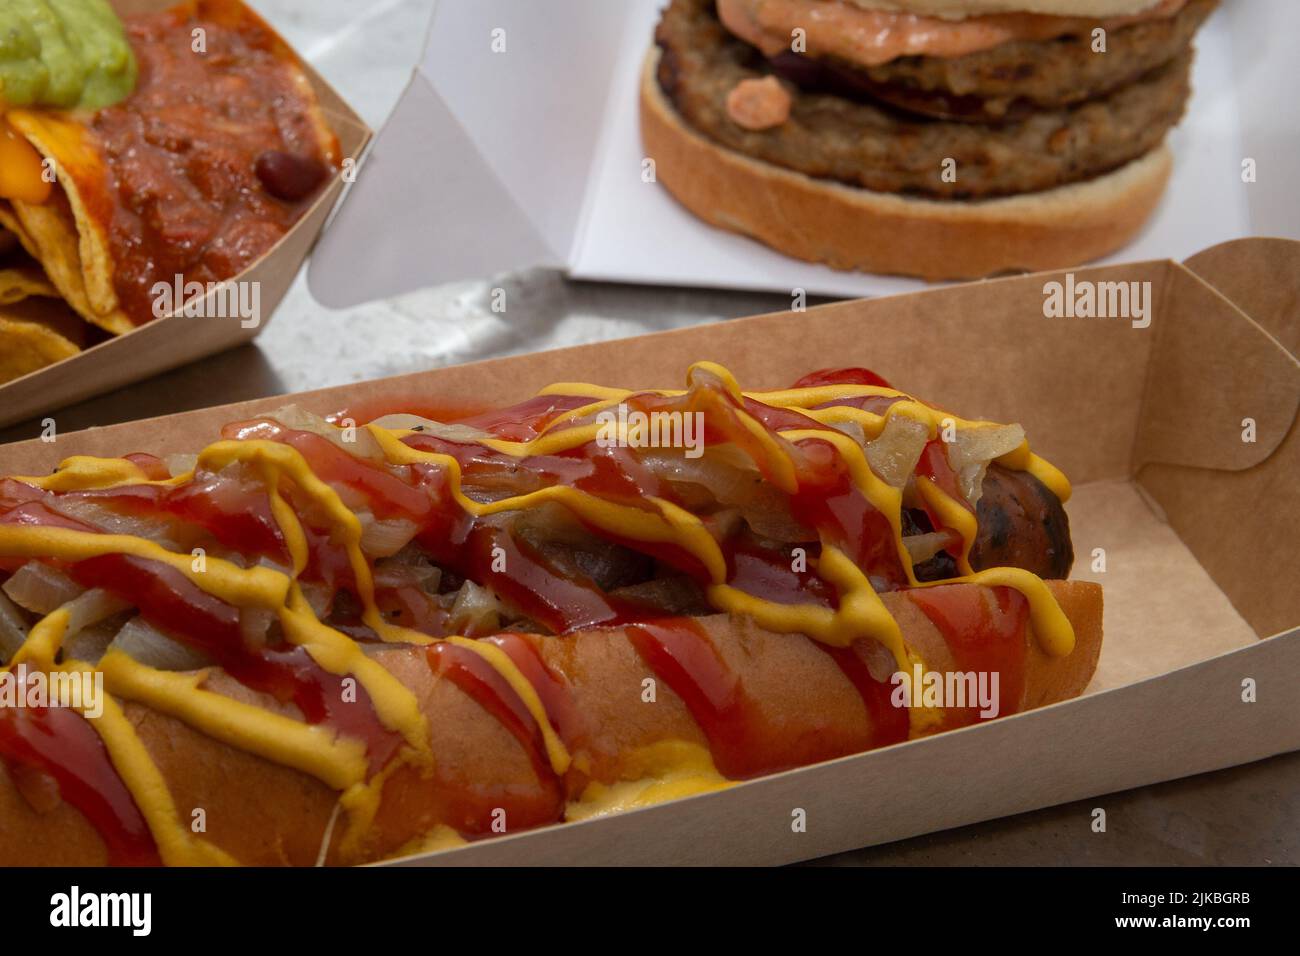 Selection of street food hot dog, chilli nachos and burger serving suggestion. Stock Photo